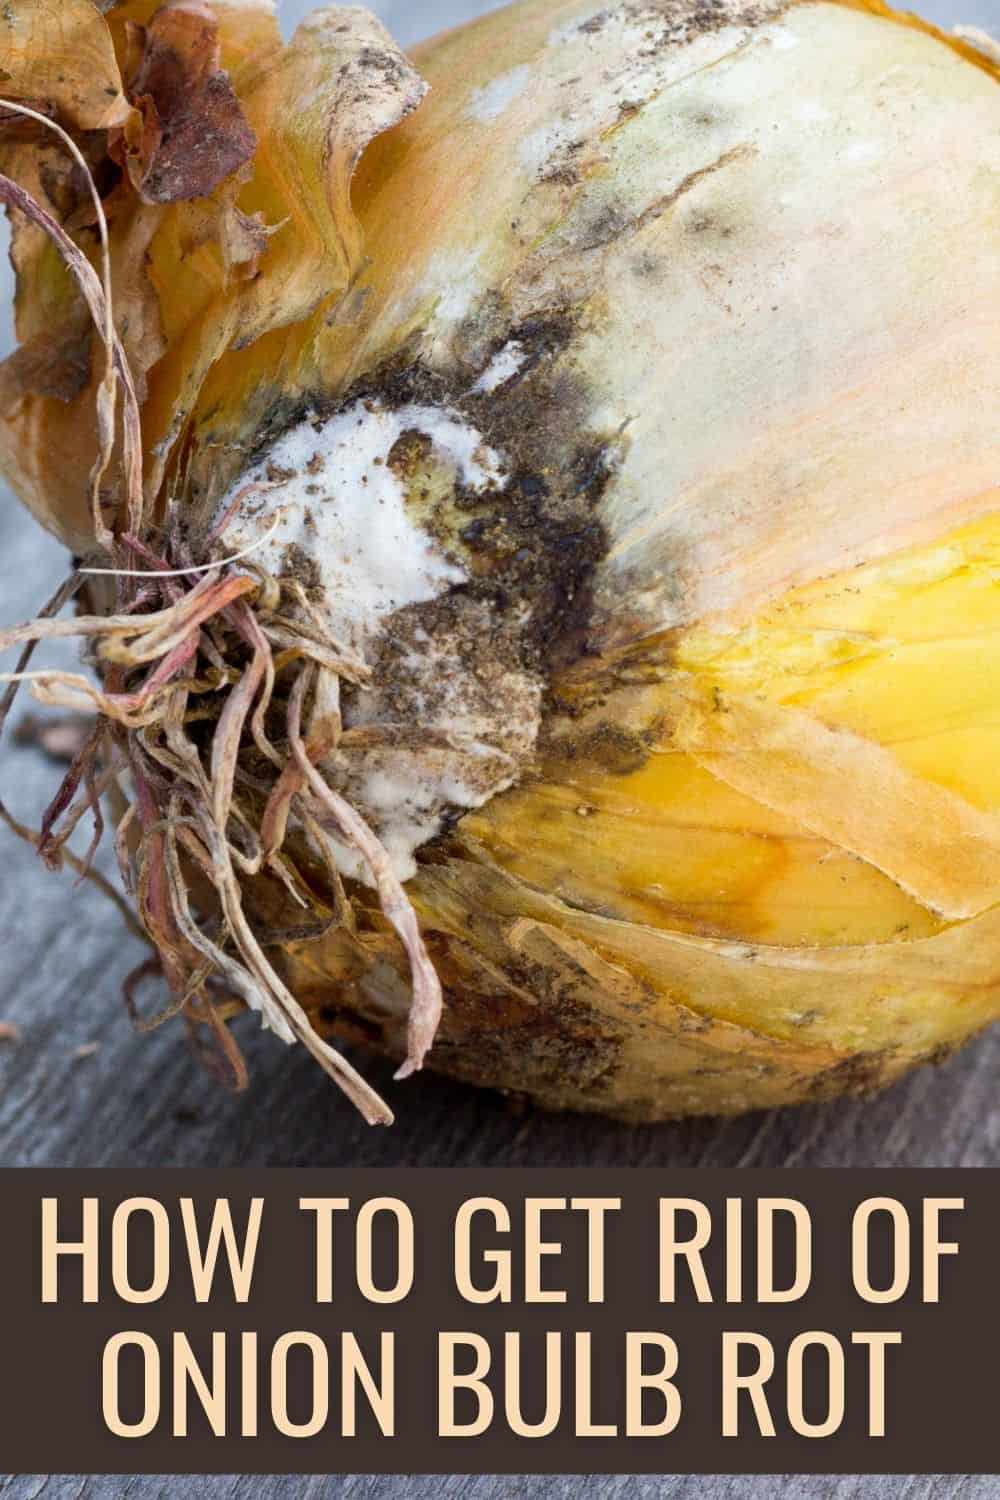 How to get rid of onion bulb rot